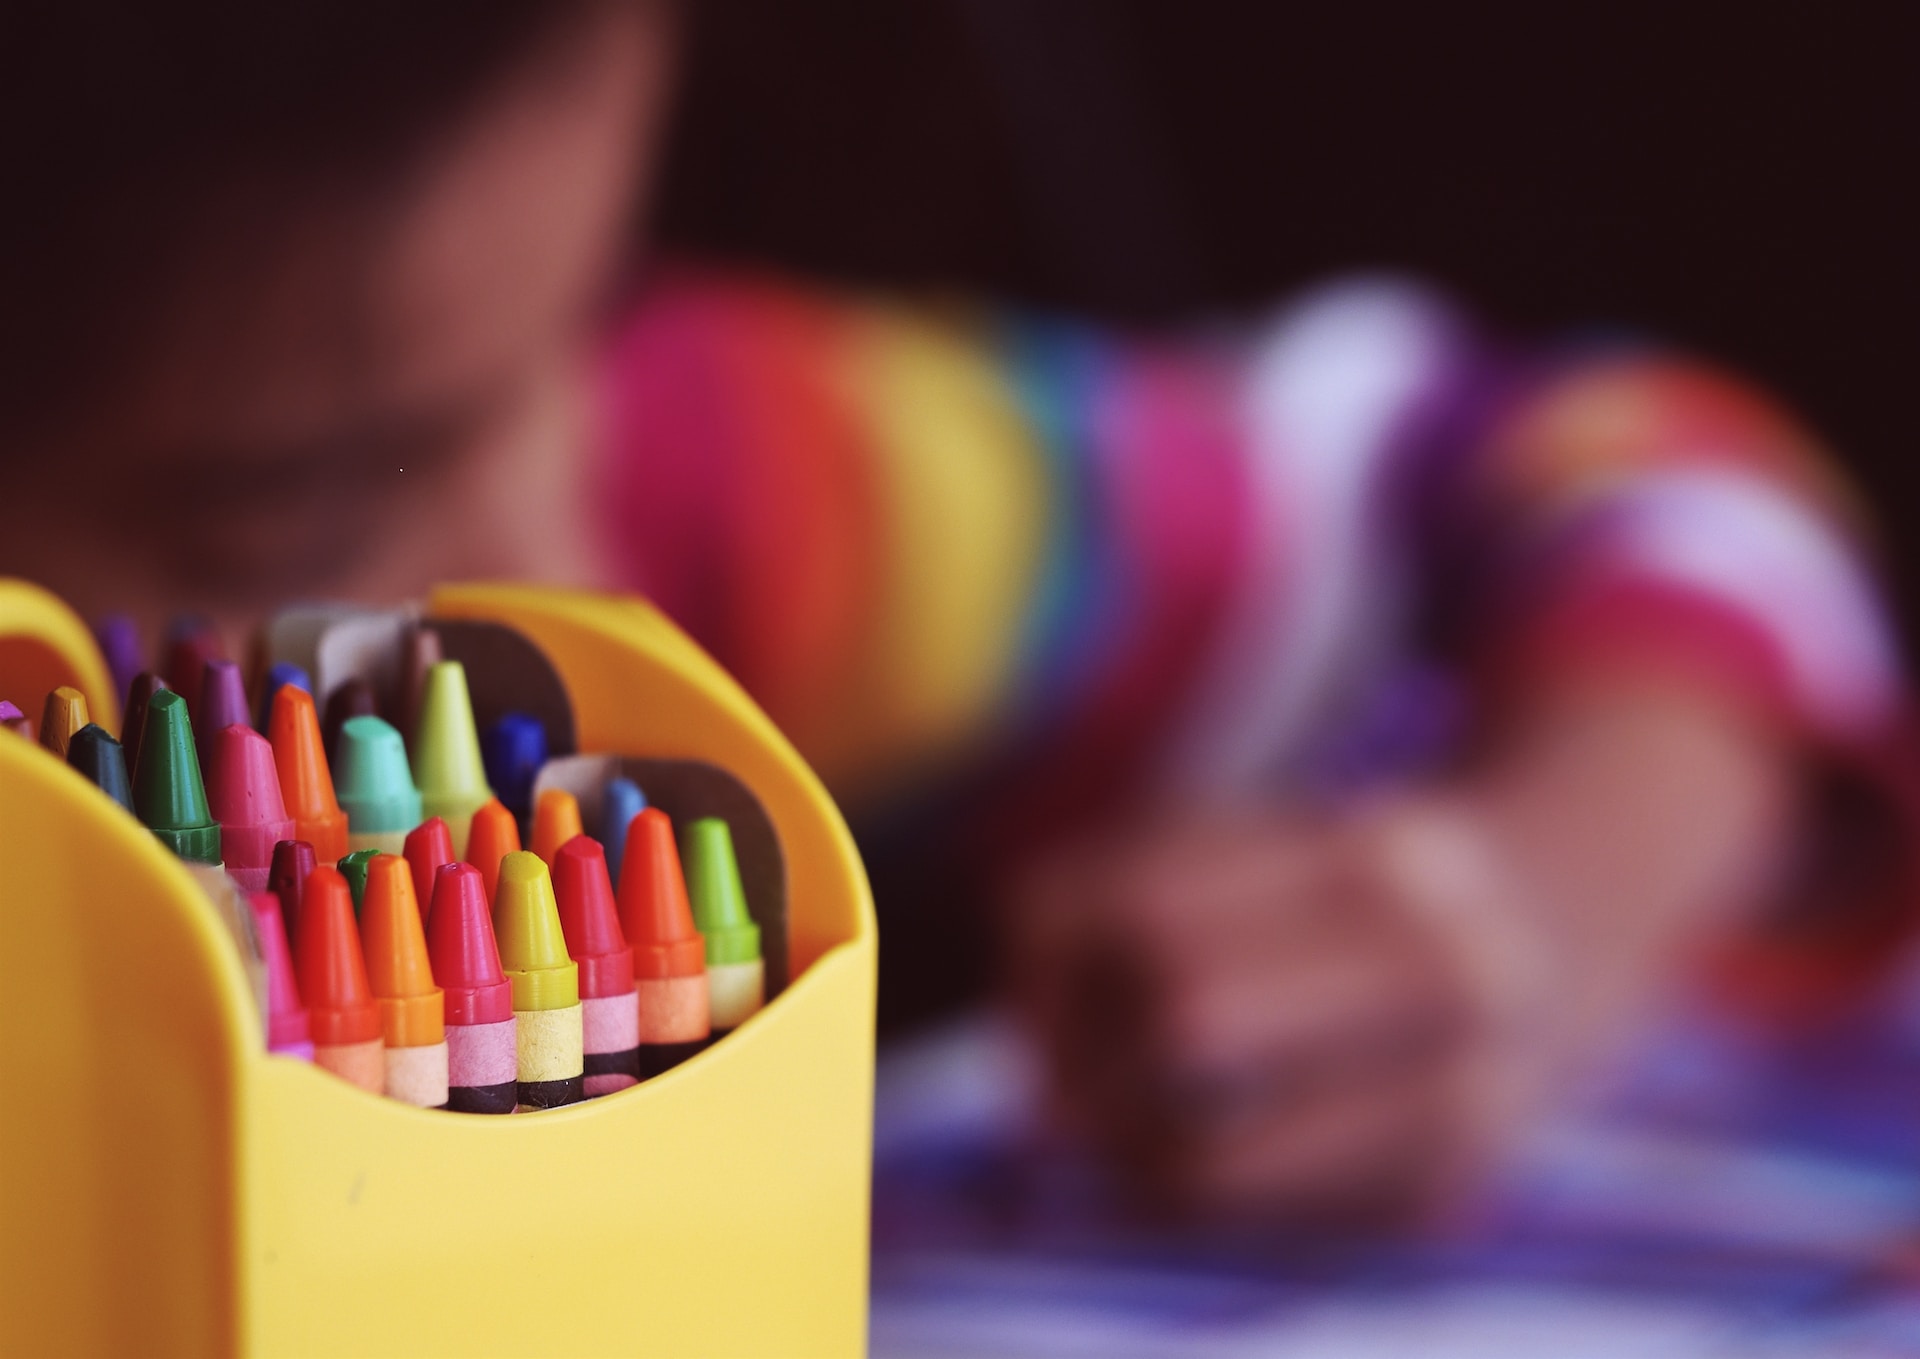 Child at day-care center colors with crayons, crayons in foreground in focus